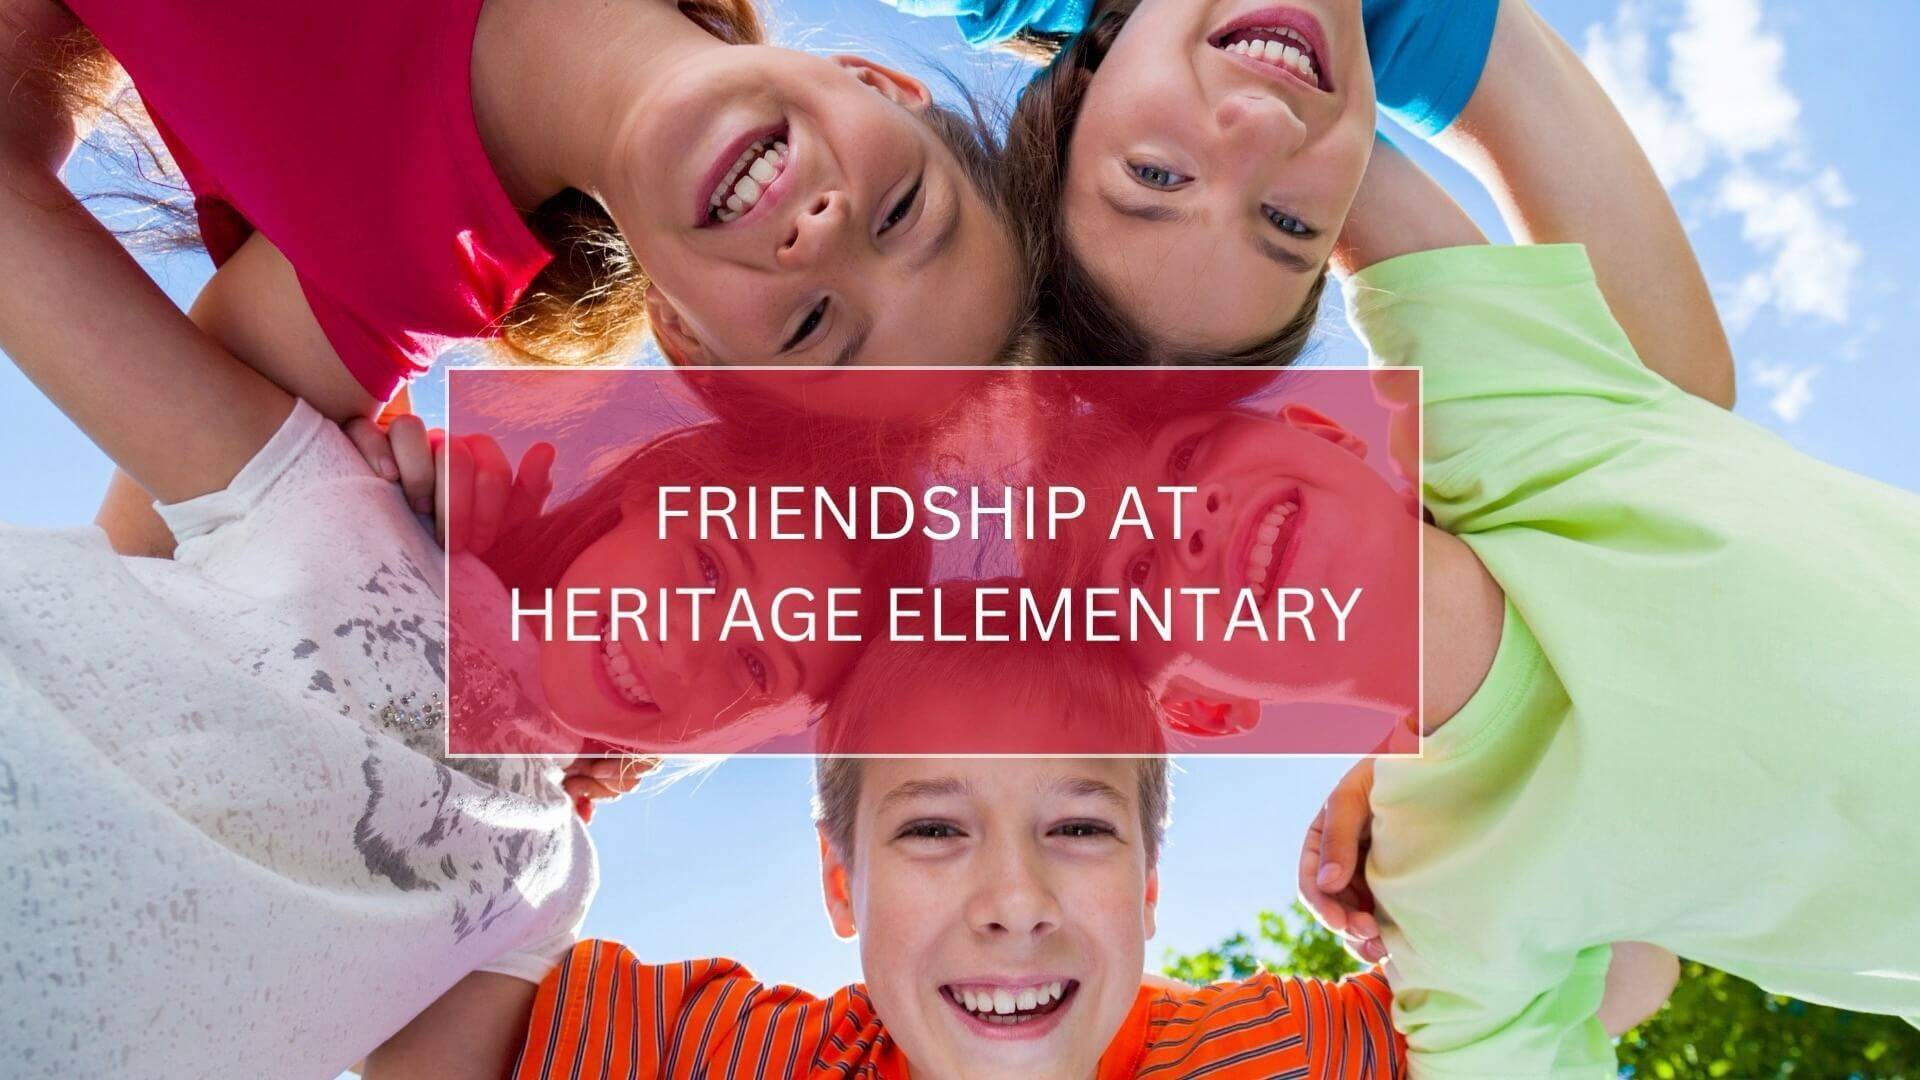 Friendship at Heritage Elementary